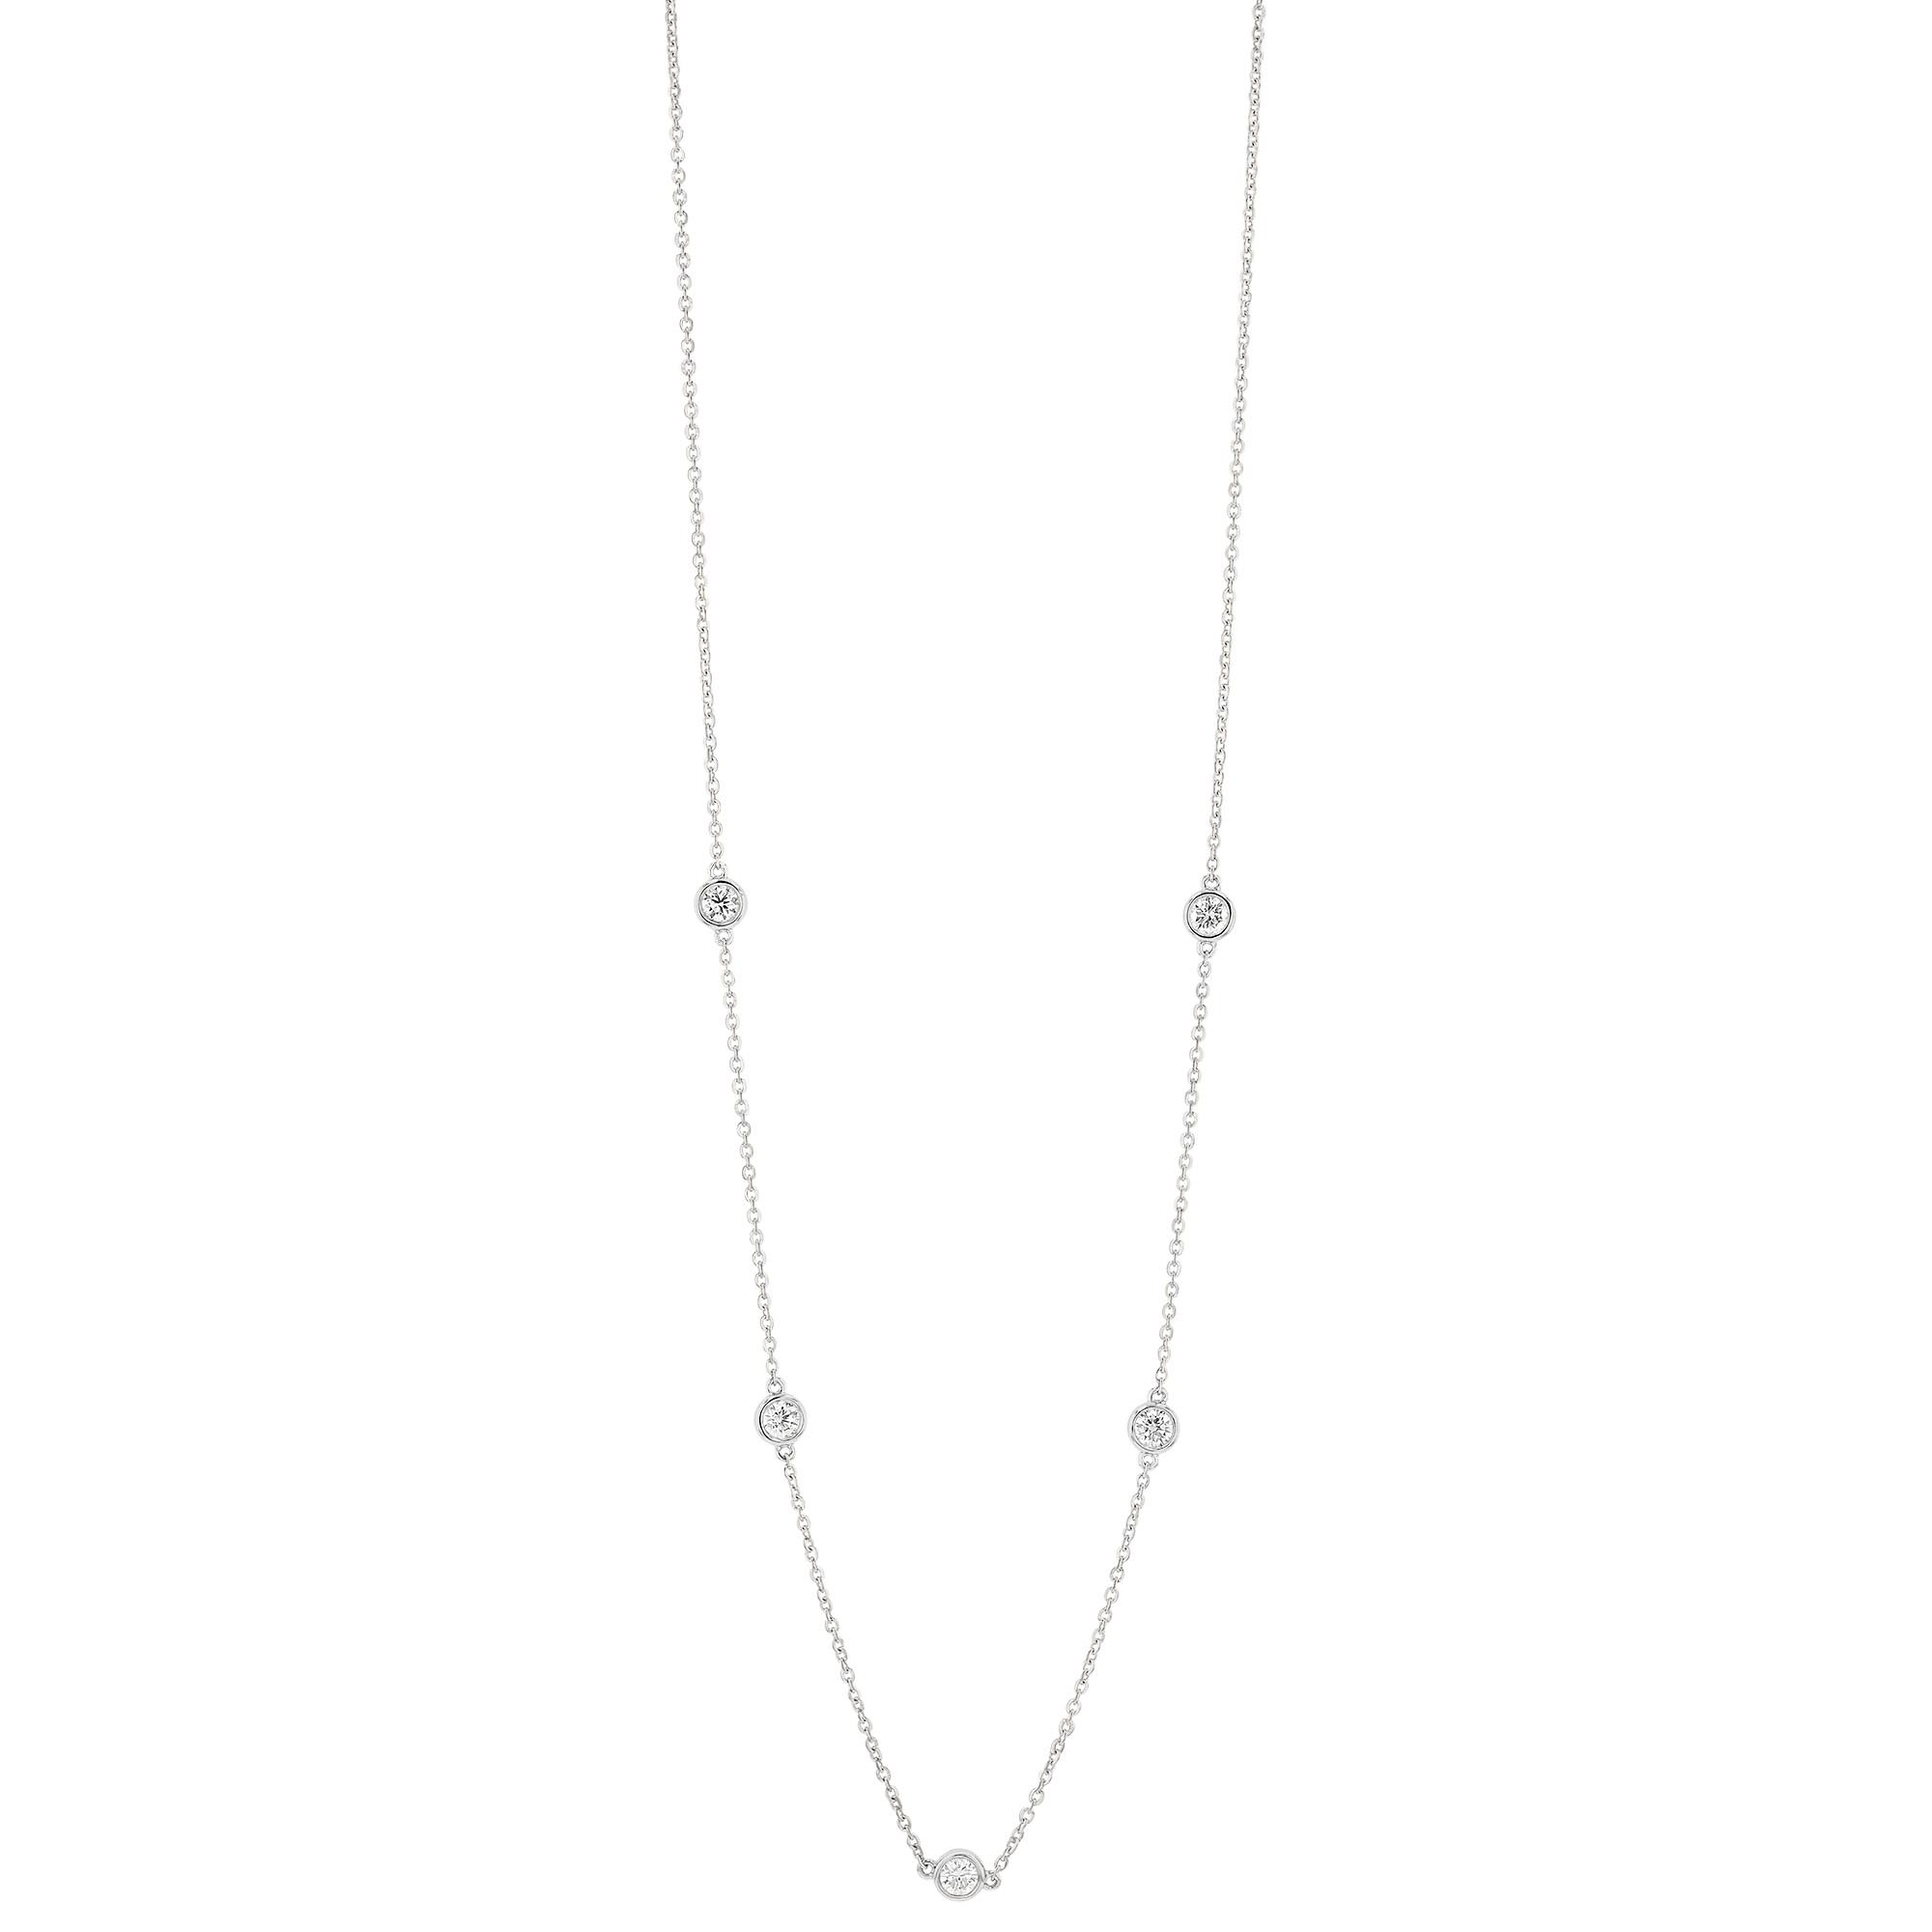 Borsheims Signature Collection Diamond 5 Station Necklace in White Gold ...